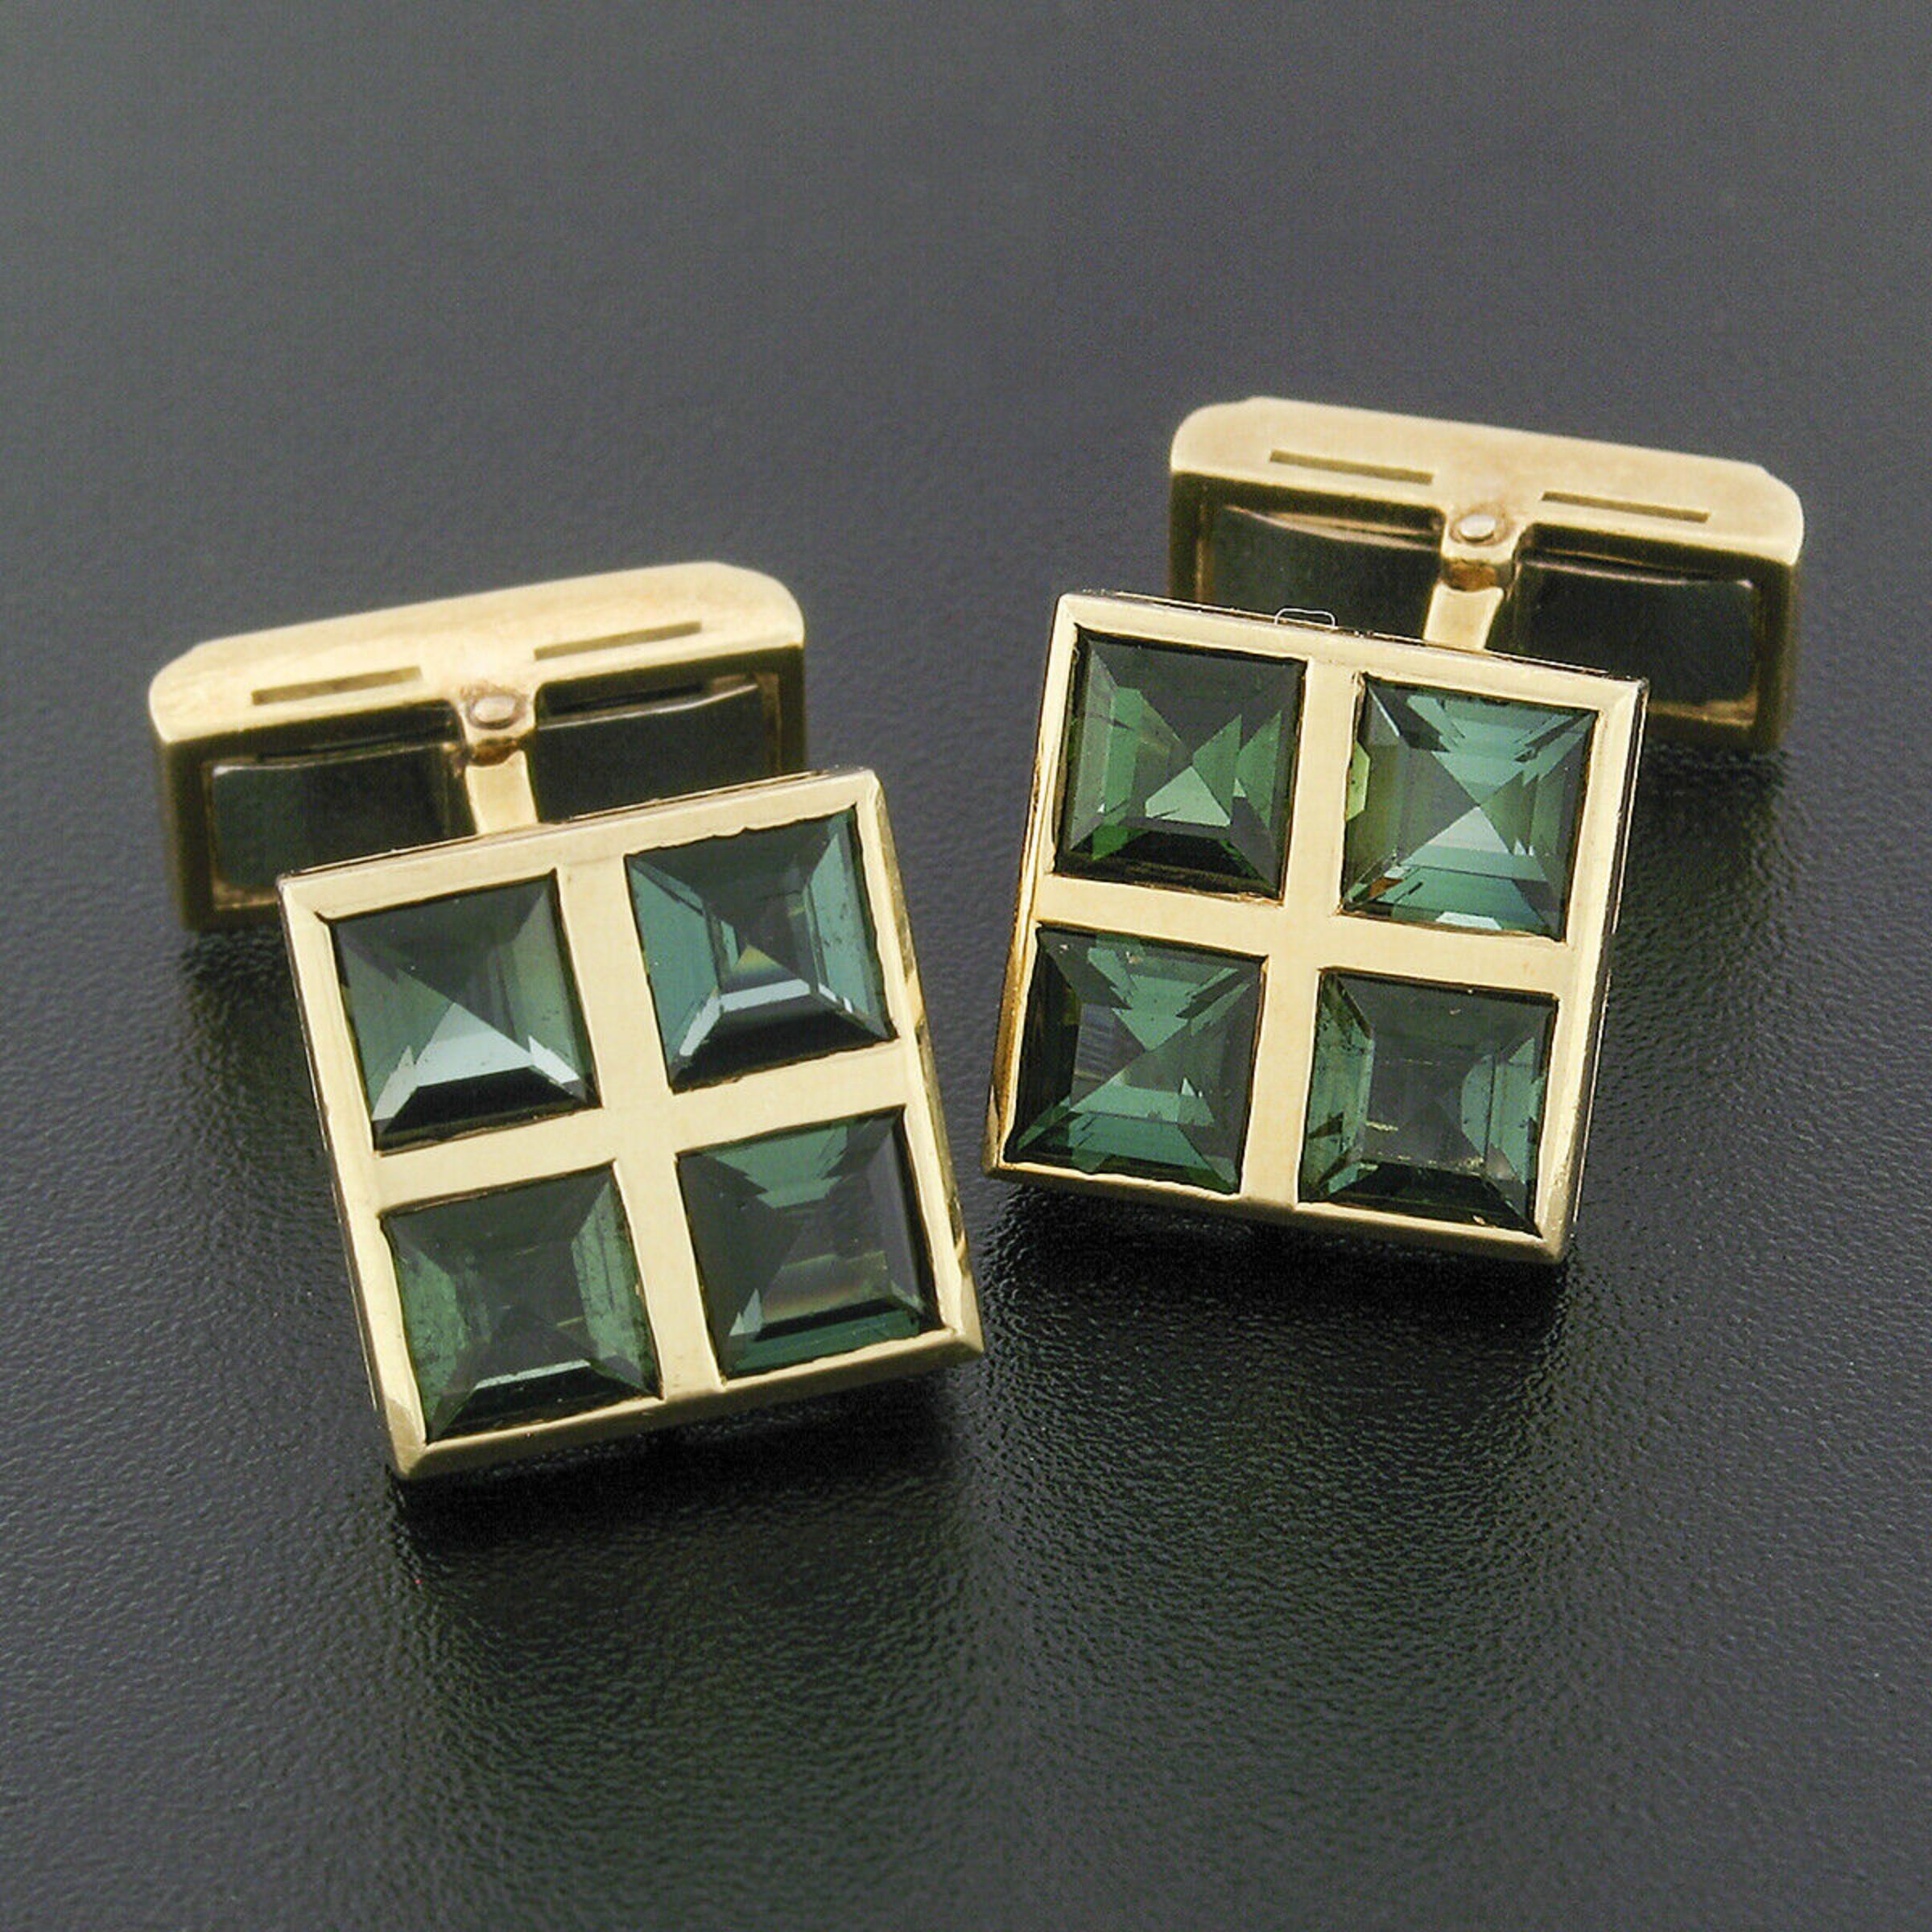 This vintage pair of men's cuff links is crafted in solid 18k yellow gold and feature a grid design that each carry four square step cut tourmalines at the front as well as two on the backing. The stones show a gorgeous, rich, vivid green color